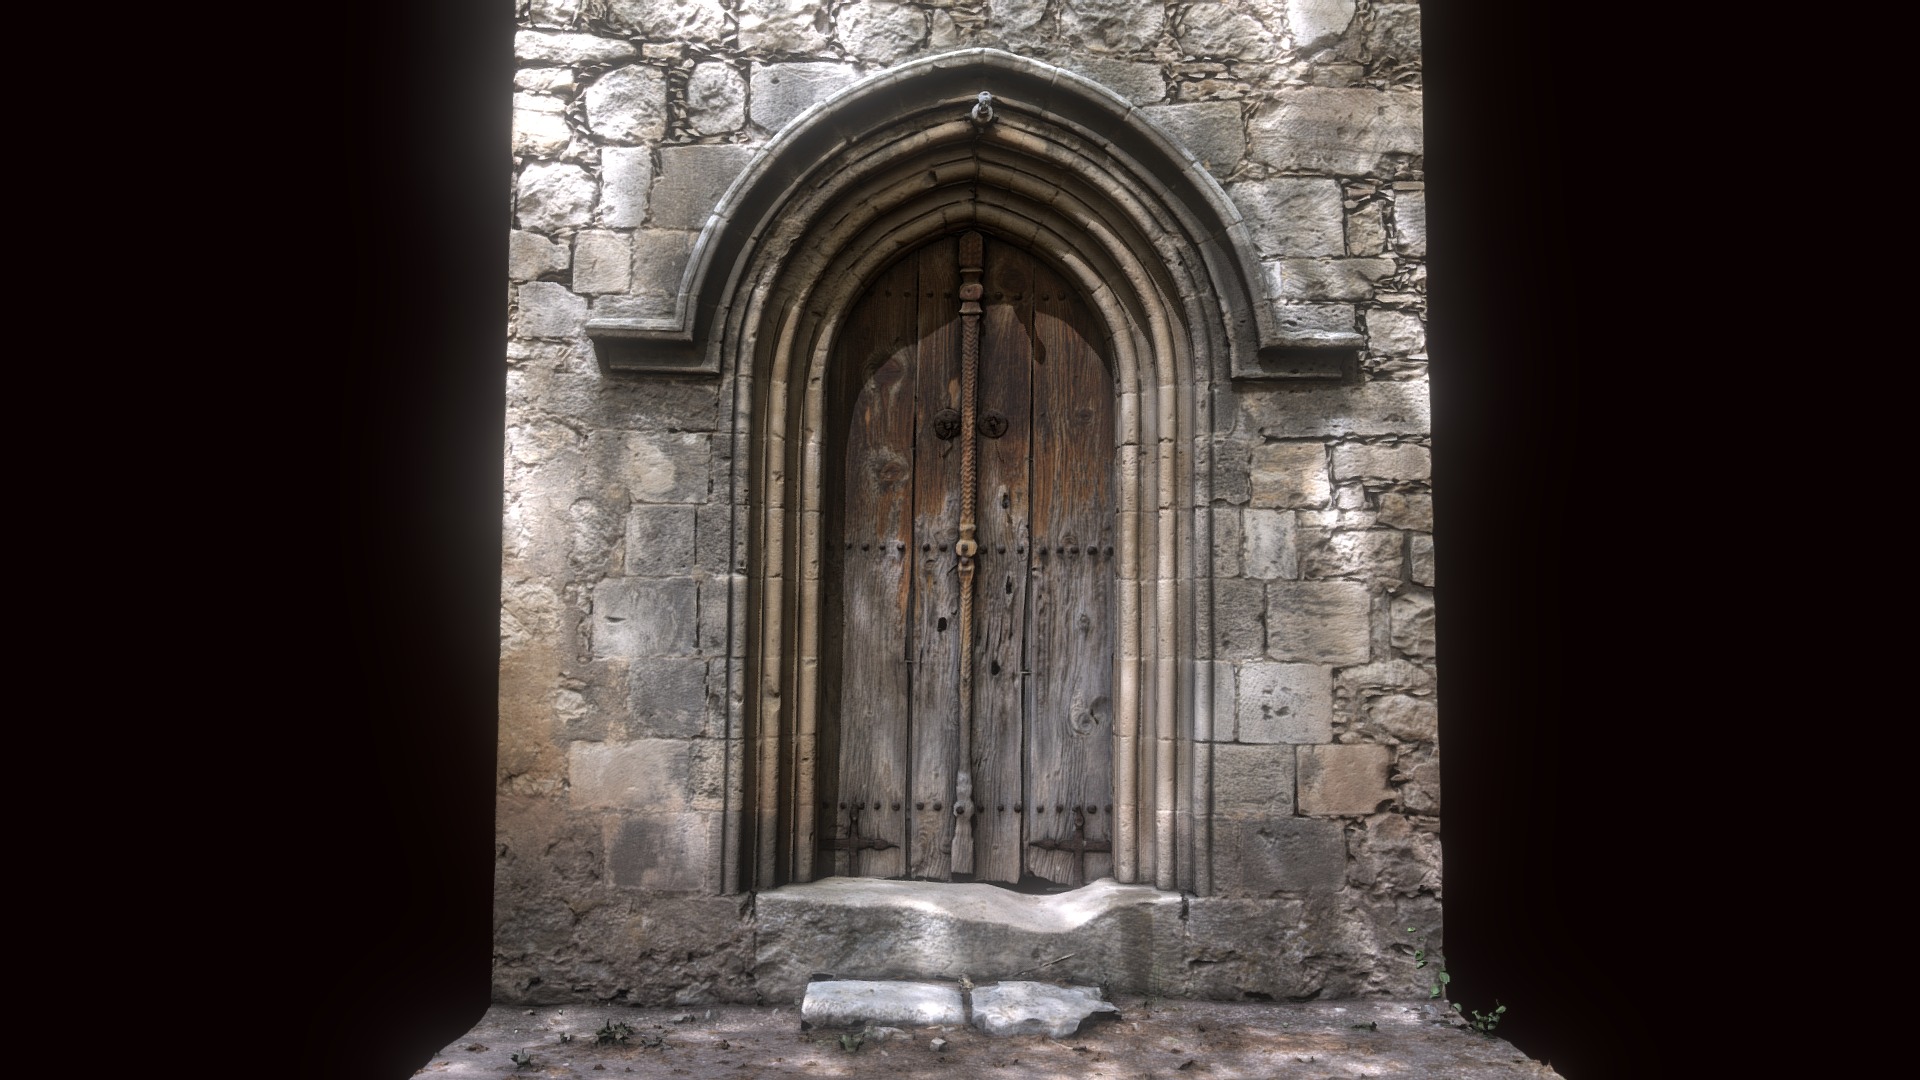 3D model Abandoned Monastery church door - This is a 3D model of the Abandoned Monastery church door. The 3D model is about a door in a stone building.